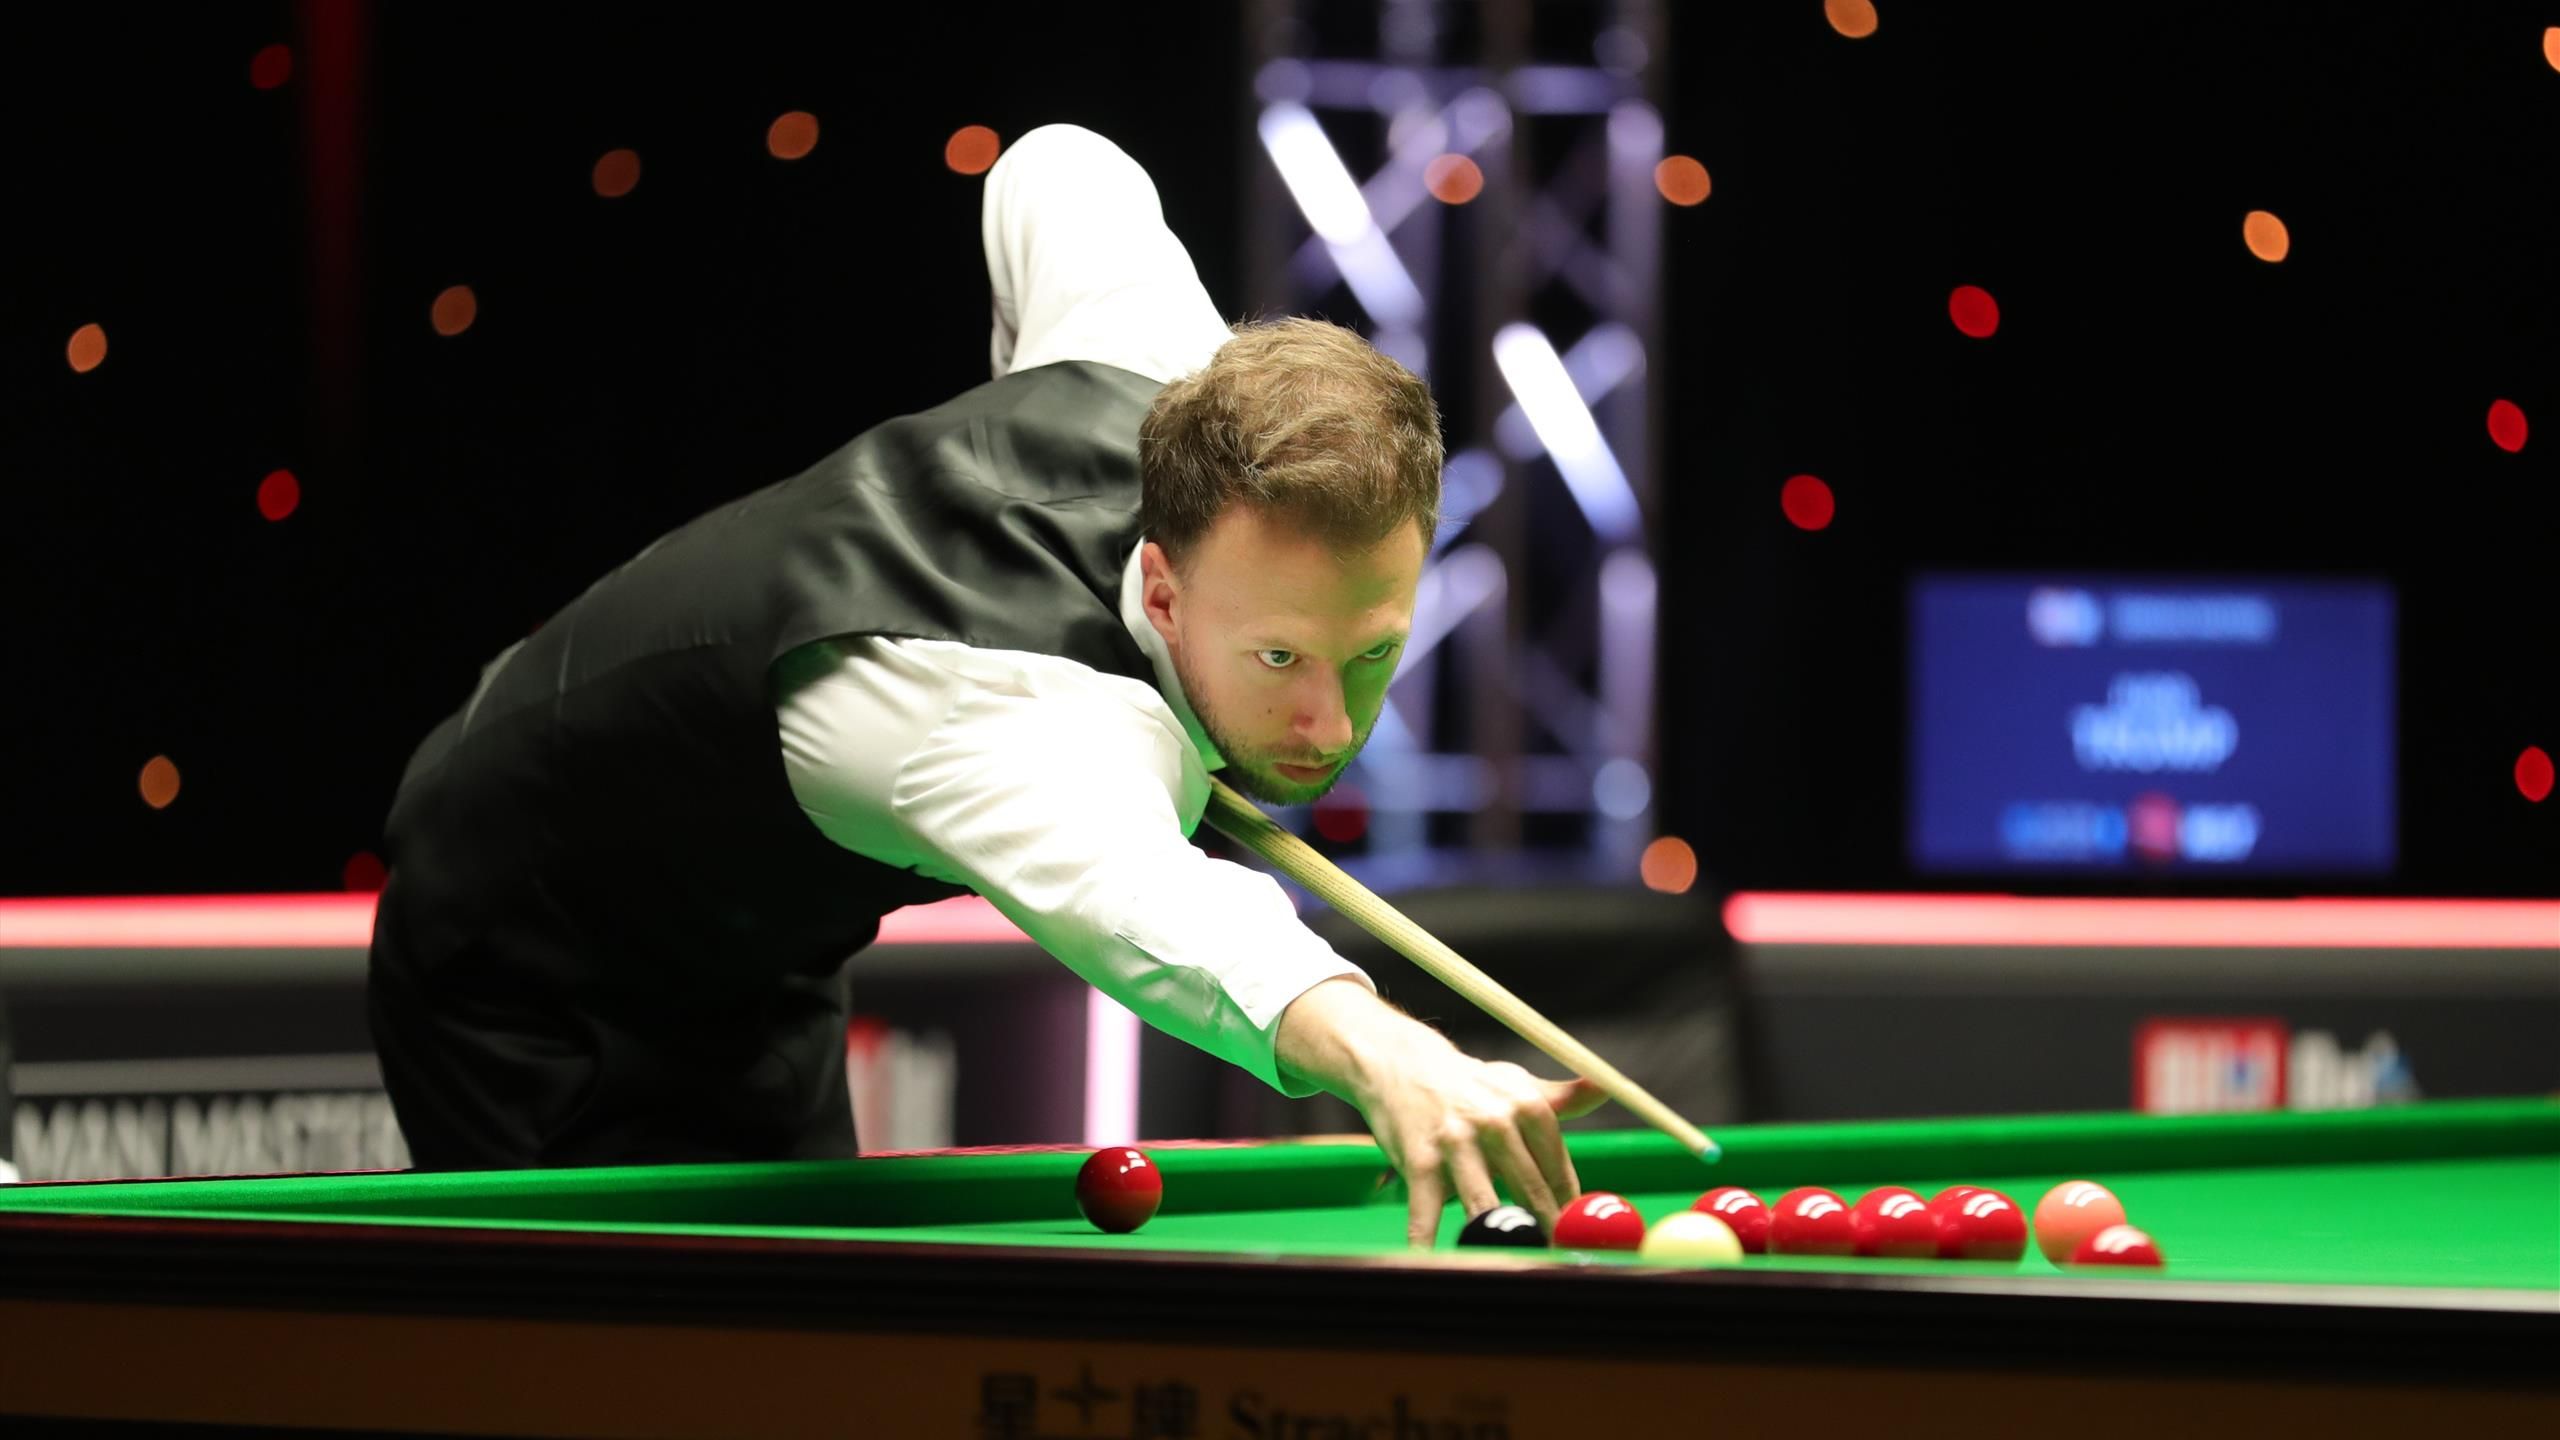 Championship League Snooker 2021 Draw, schedule and latest results Judd Trump, Ronnie OSullivan